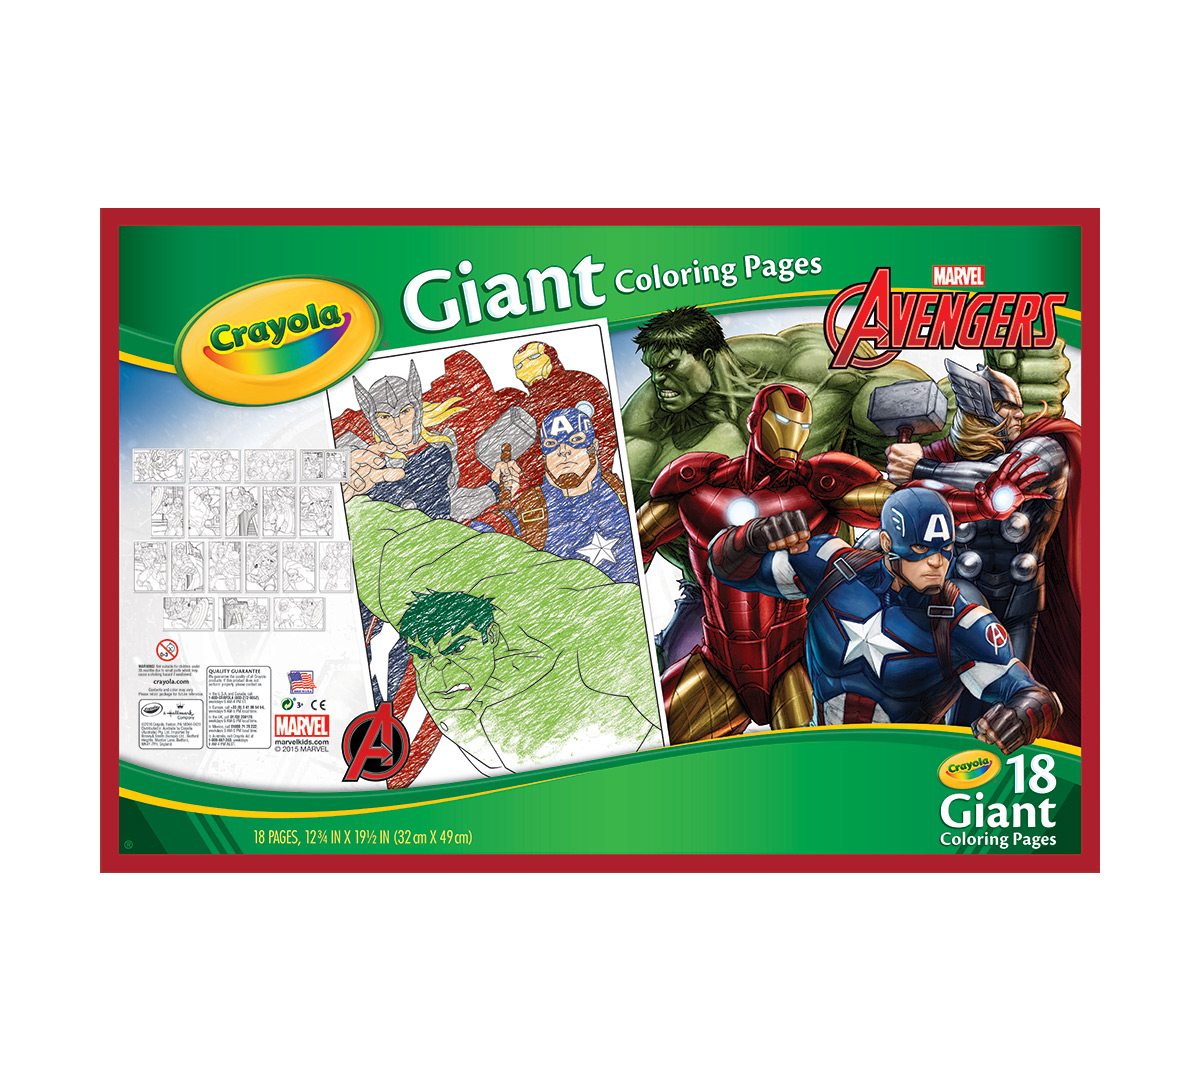 Giant Coloring Pages, Avengers Assemble   Crayola